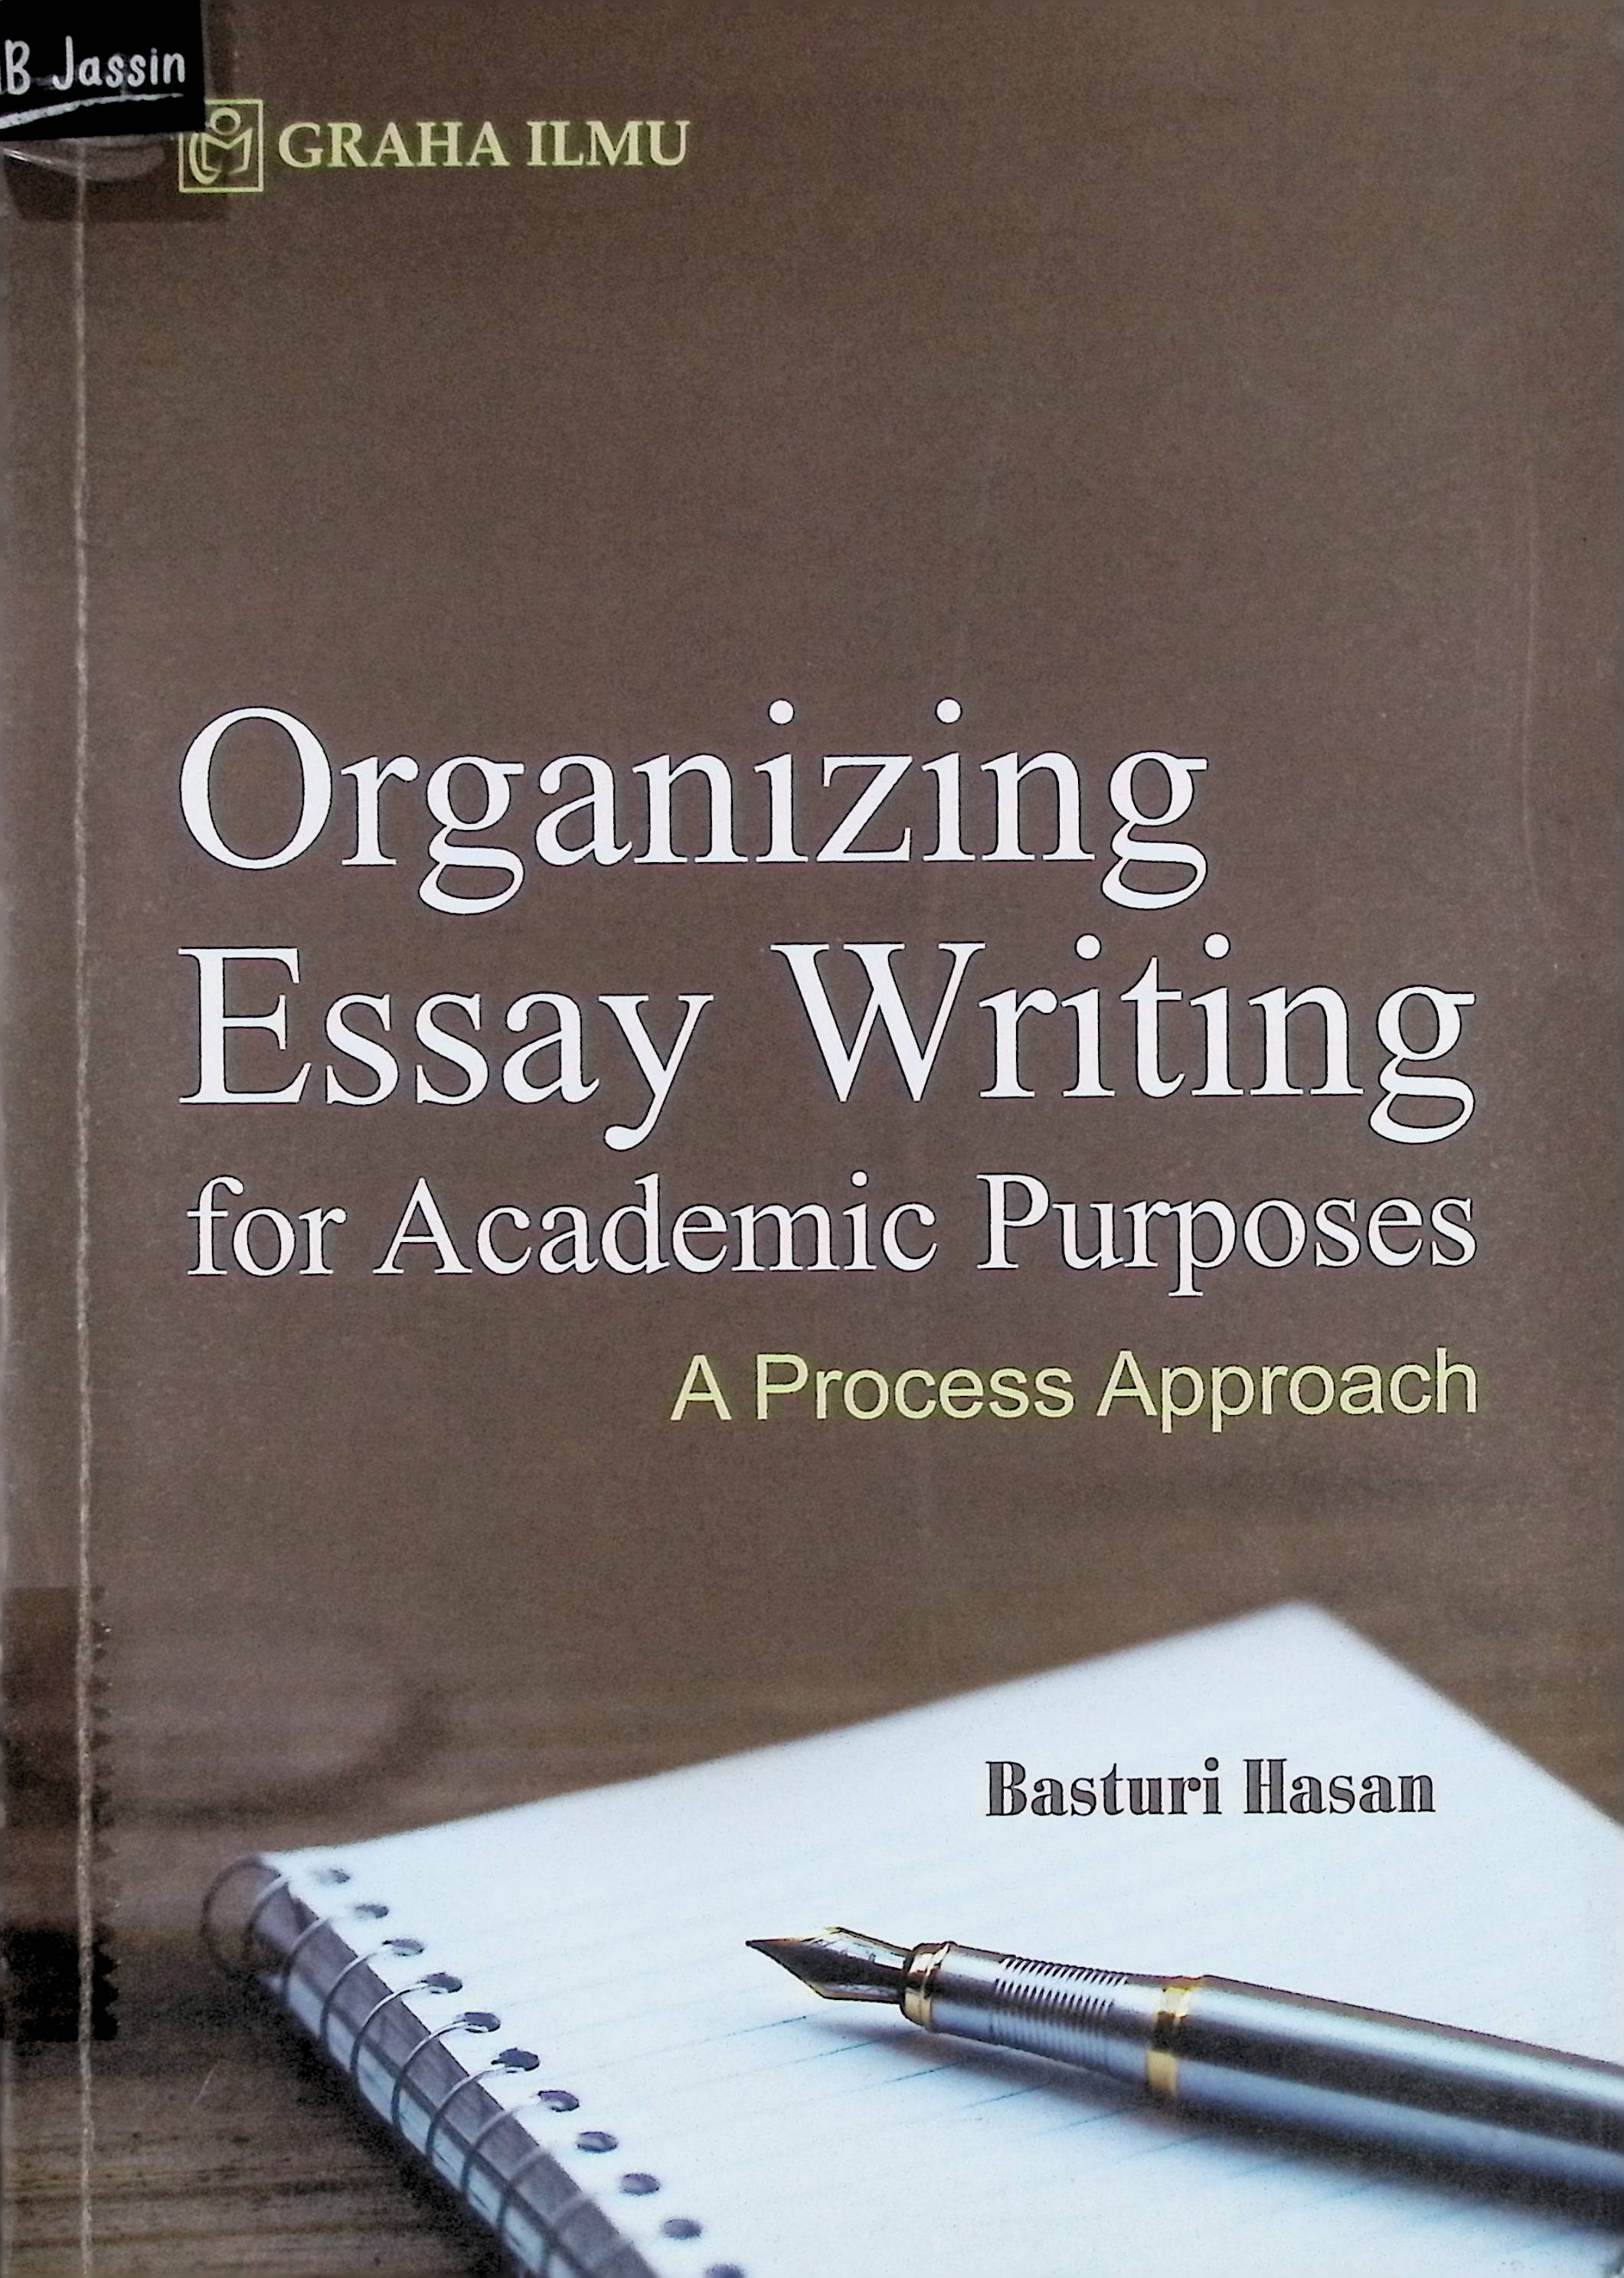 Organizing essay writing for academic purposes :  a process approach